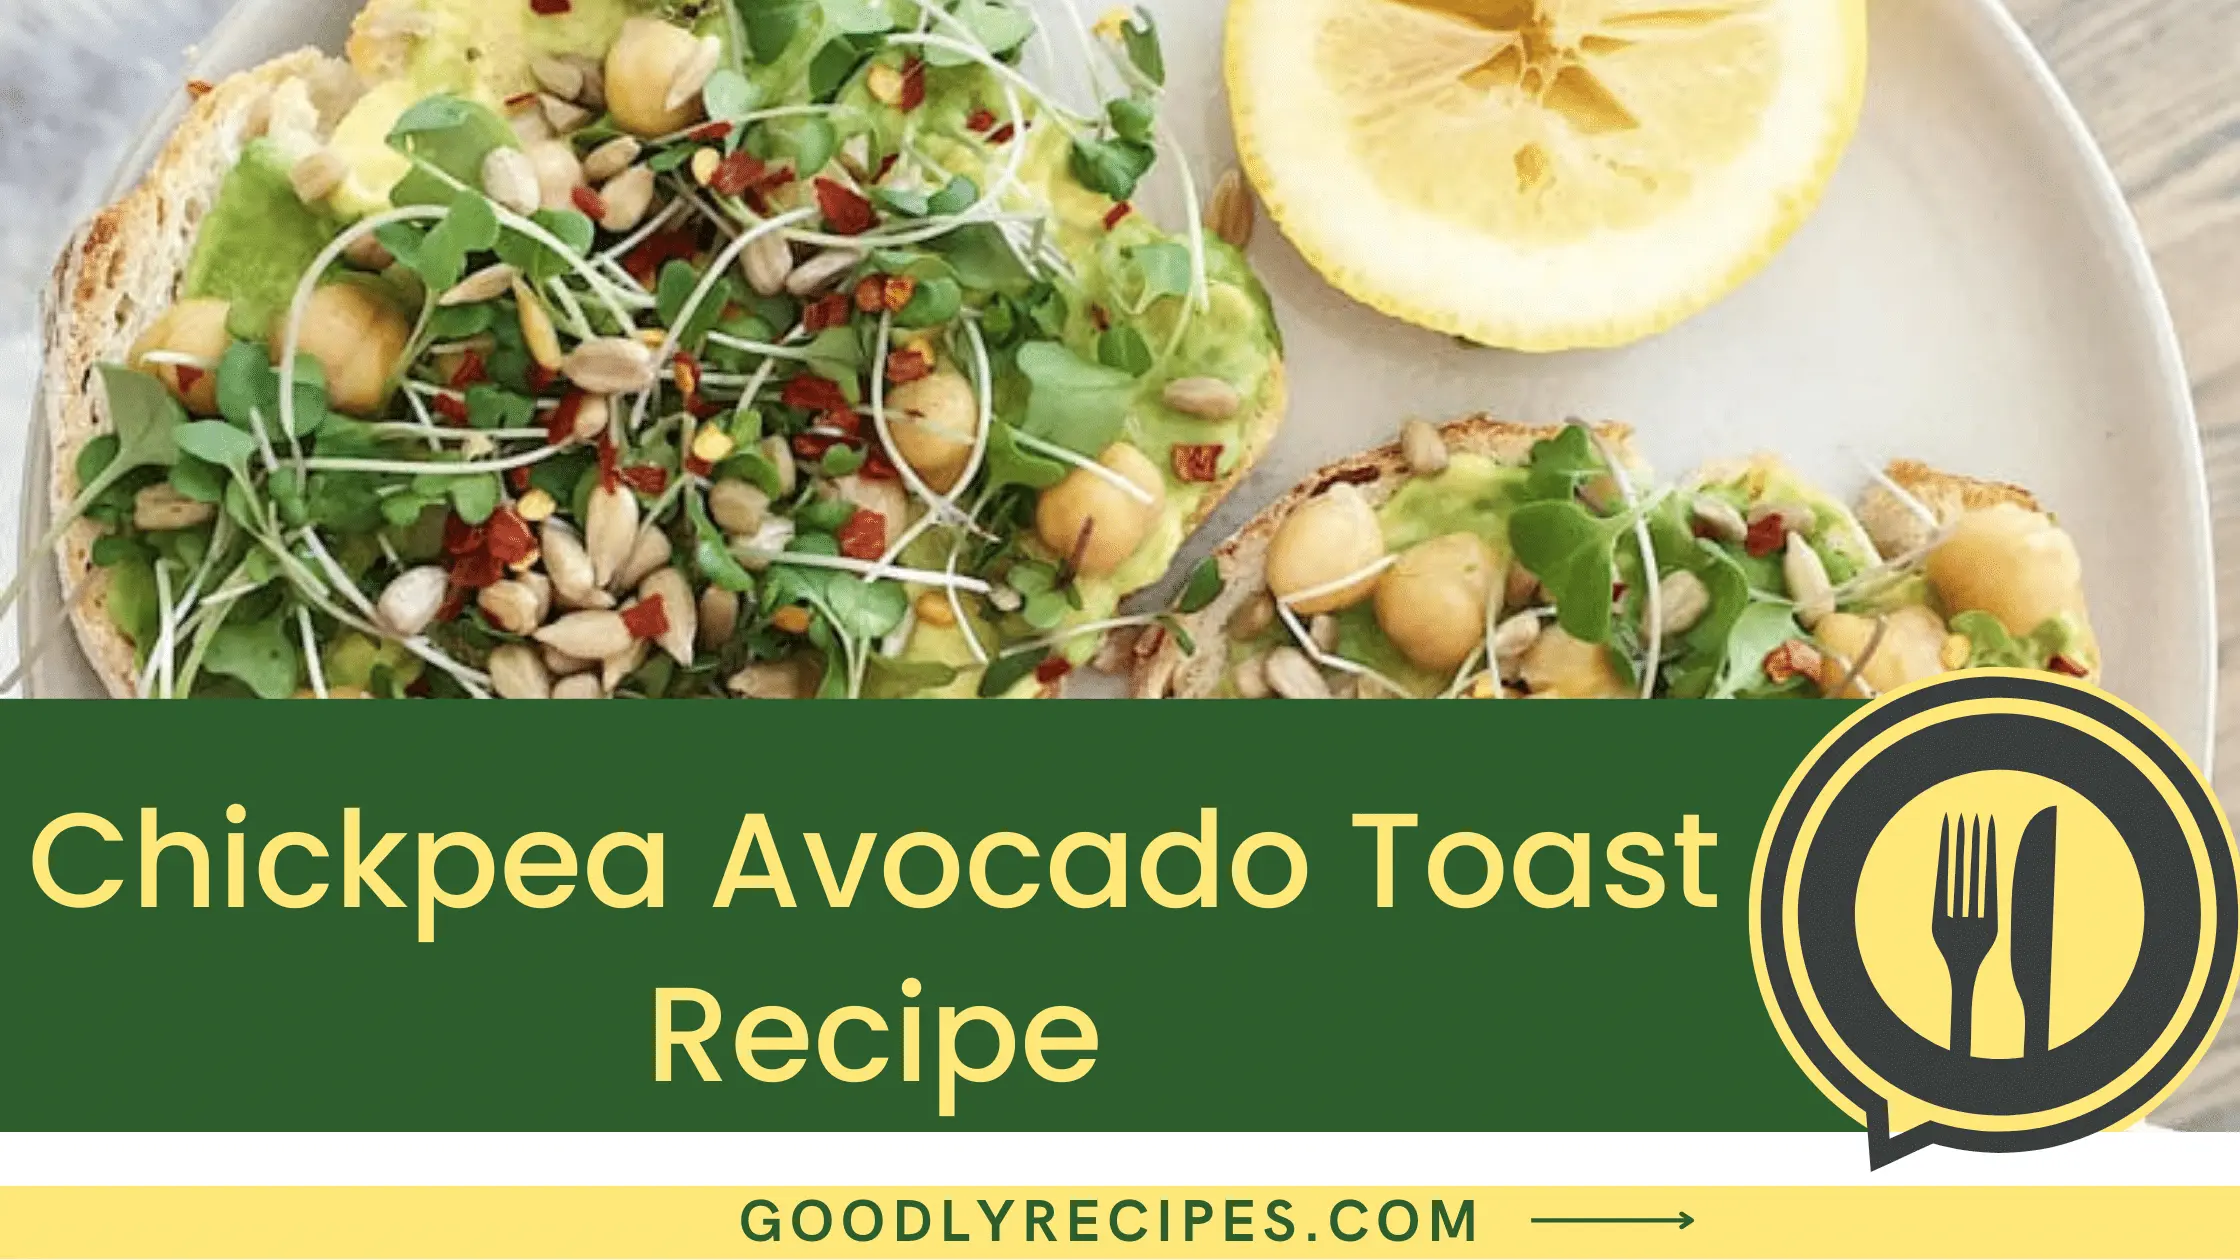 Chickpea Avocado Toast Recipe - For Food Lovers